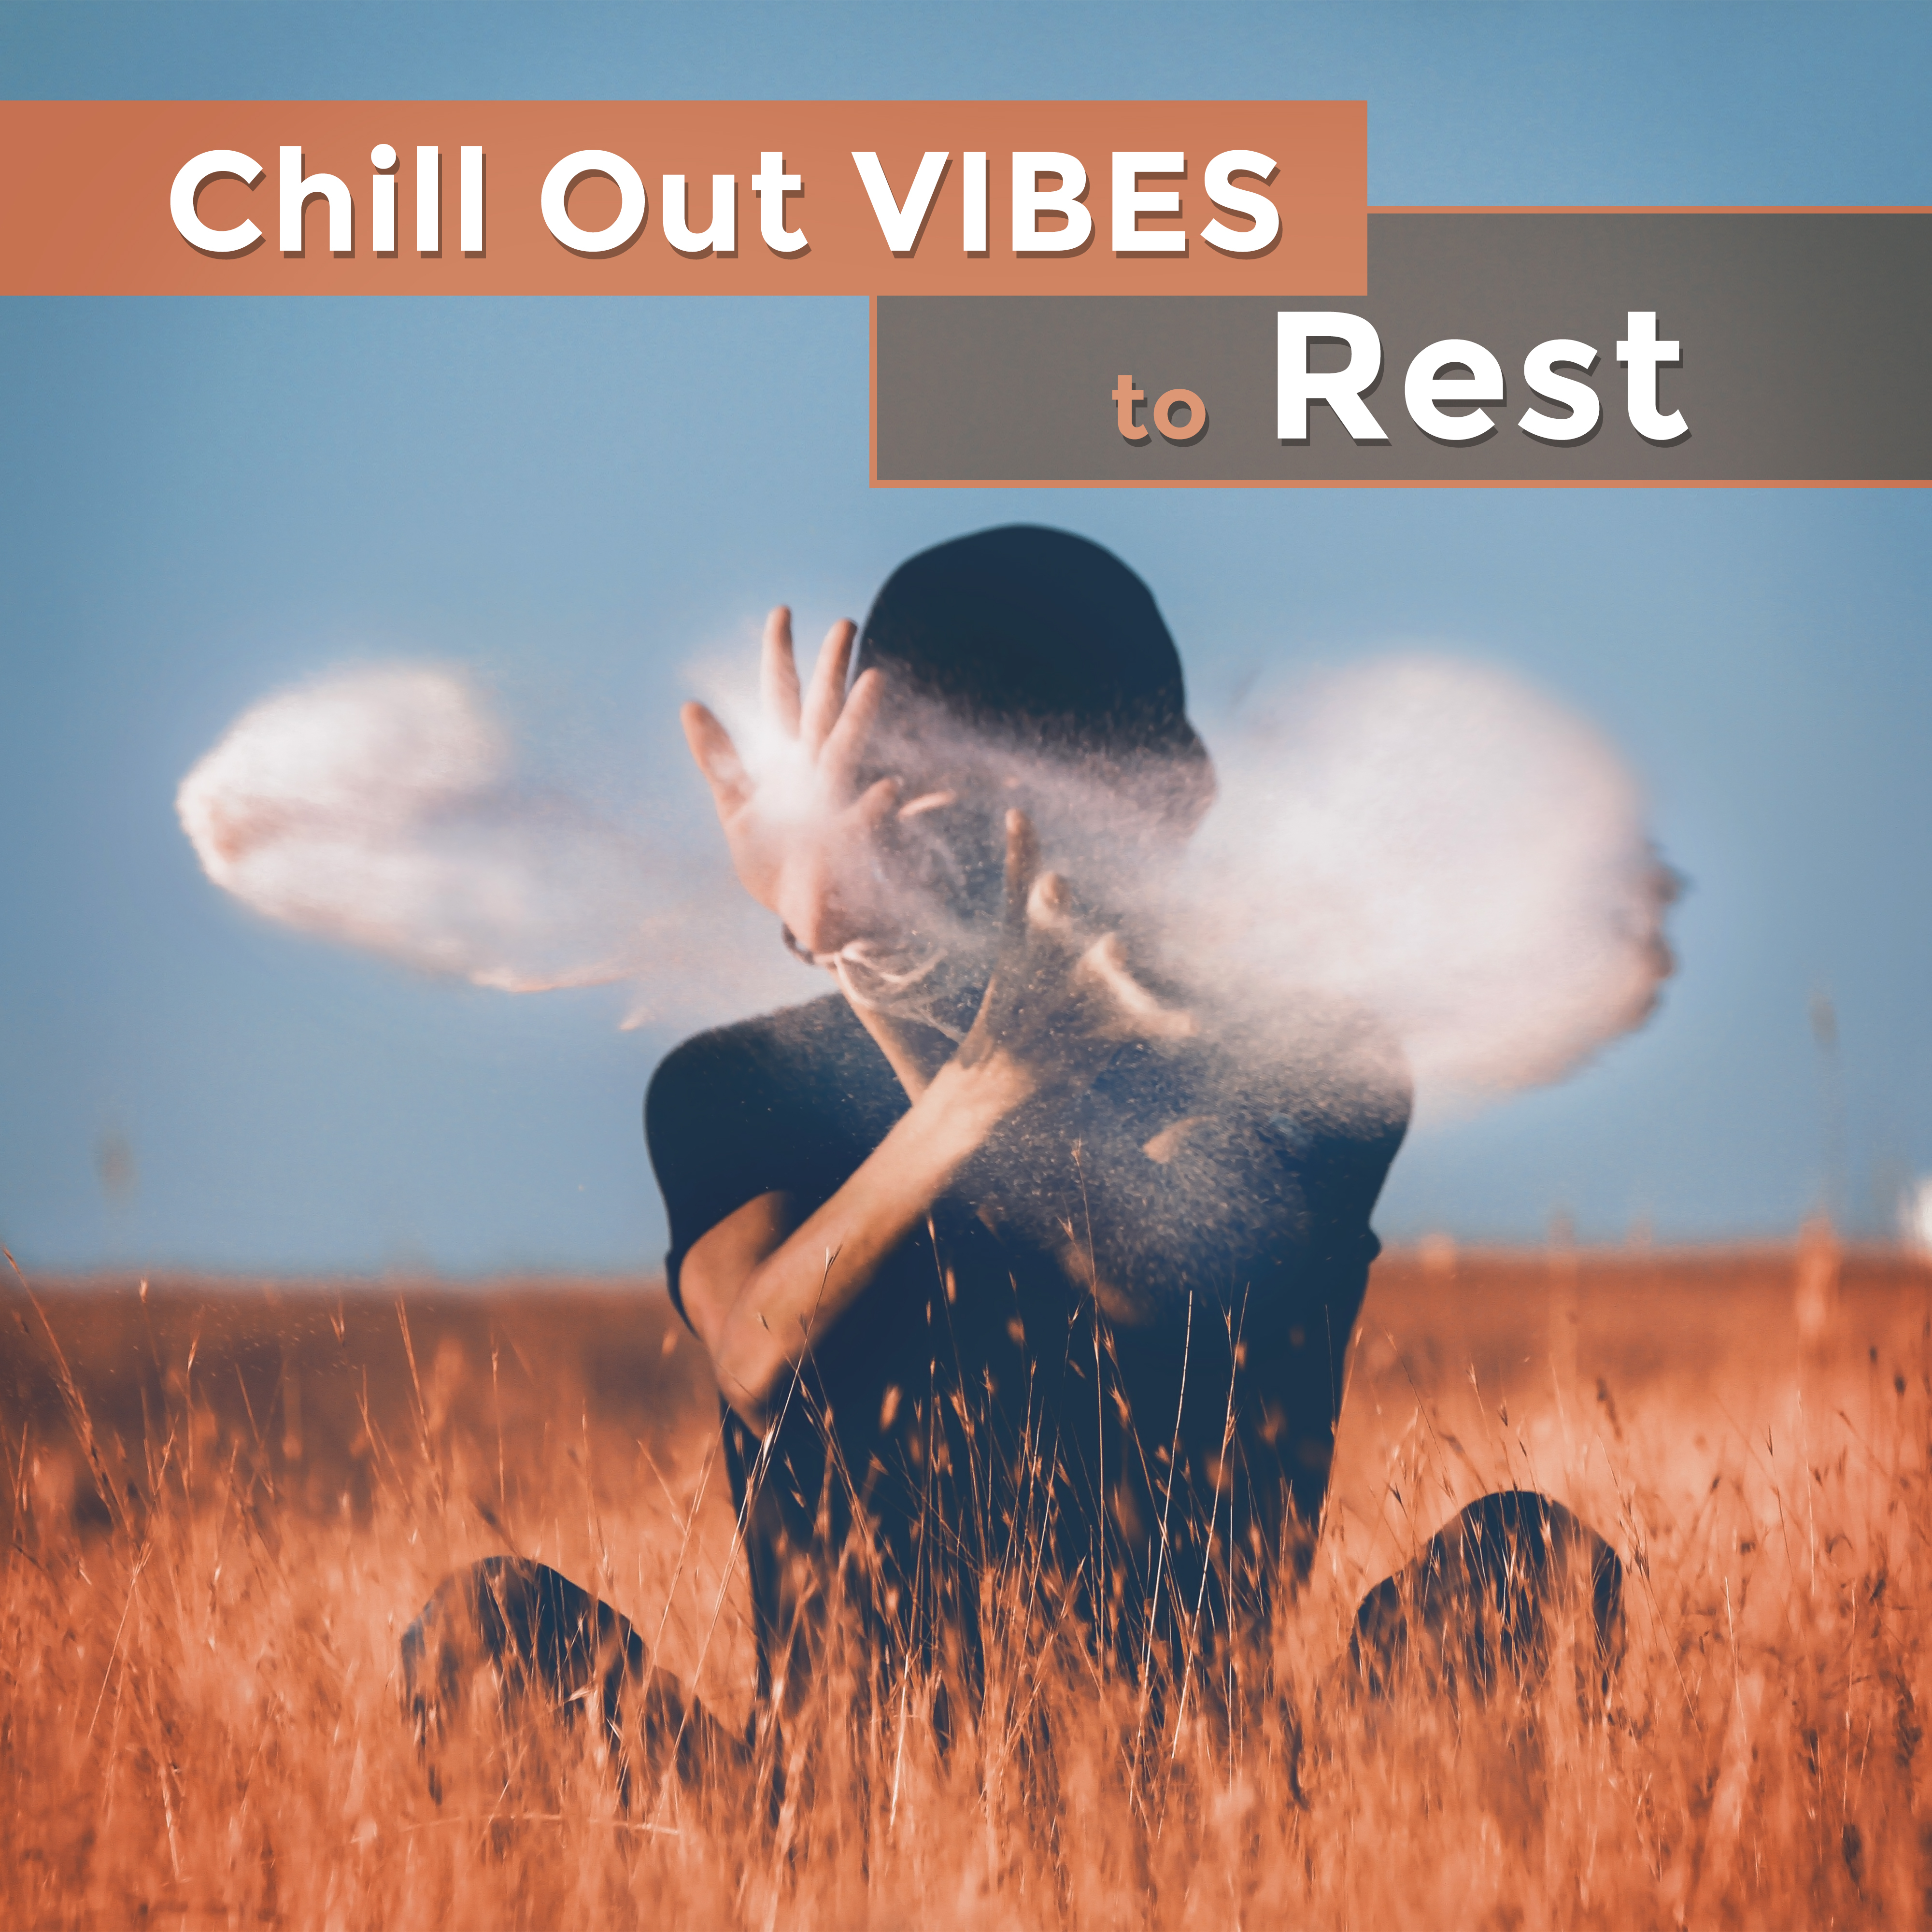 Chill Out Vibes to Rest – Easy Listening, Stress Relief, Chilled Day, Summer Vibes, Chill Out 2017